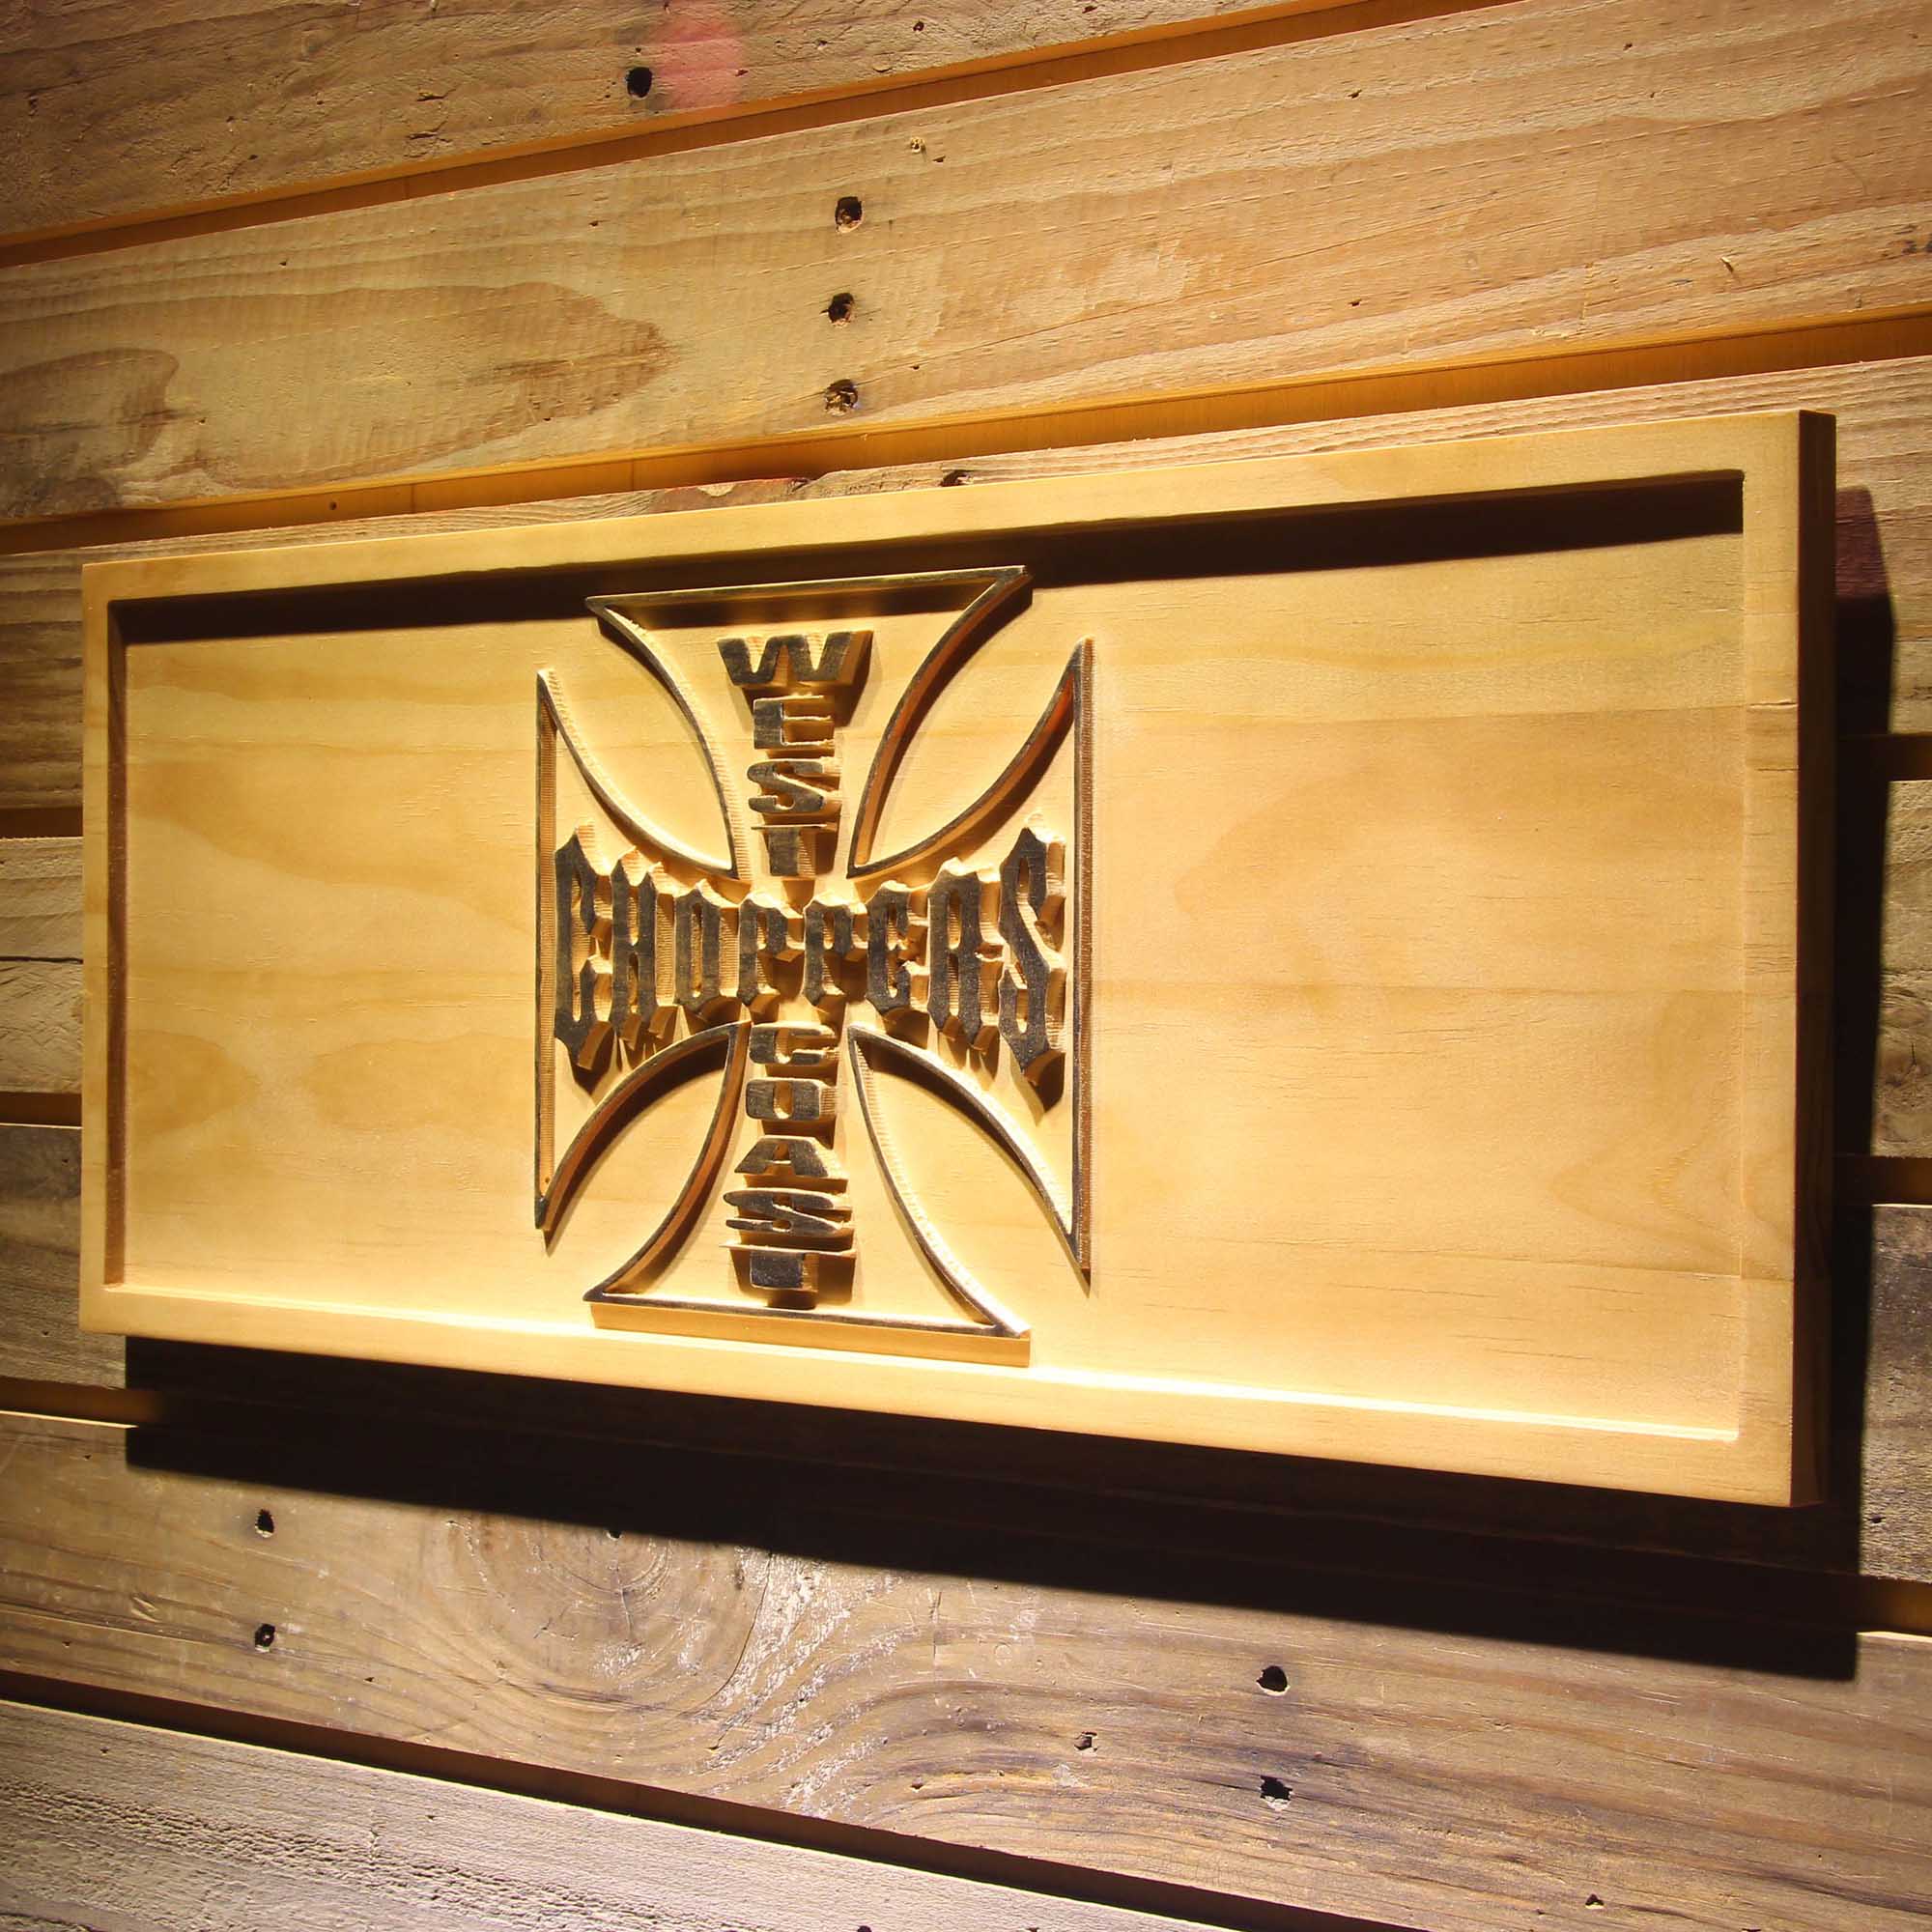 West Coast Choppers 3D Wooden Engrave Sign